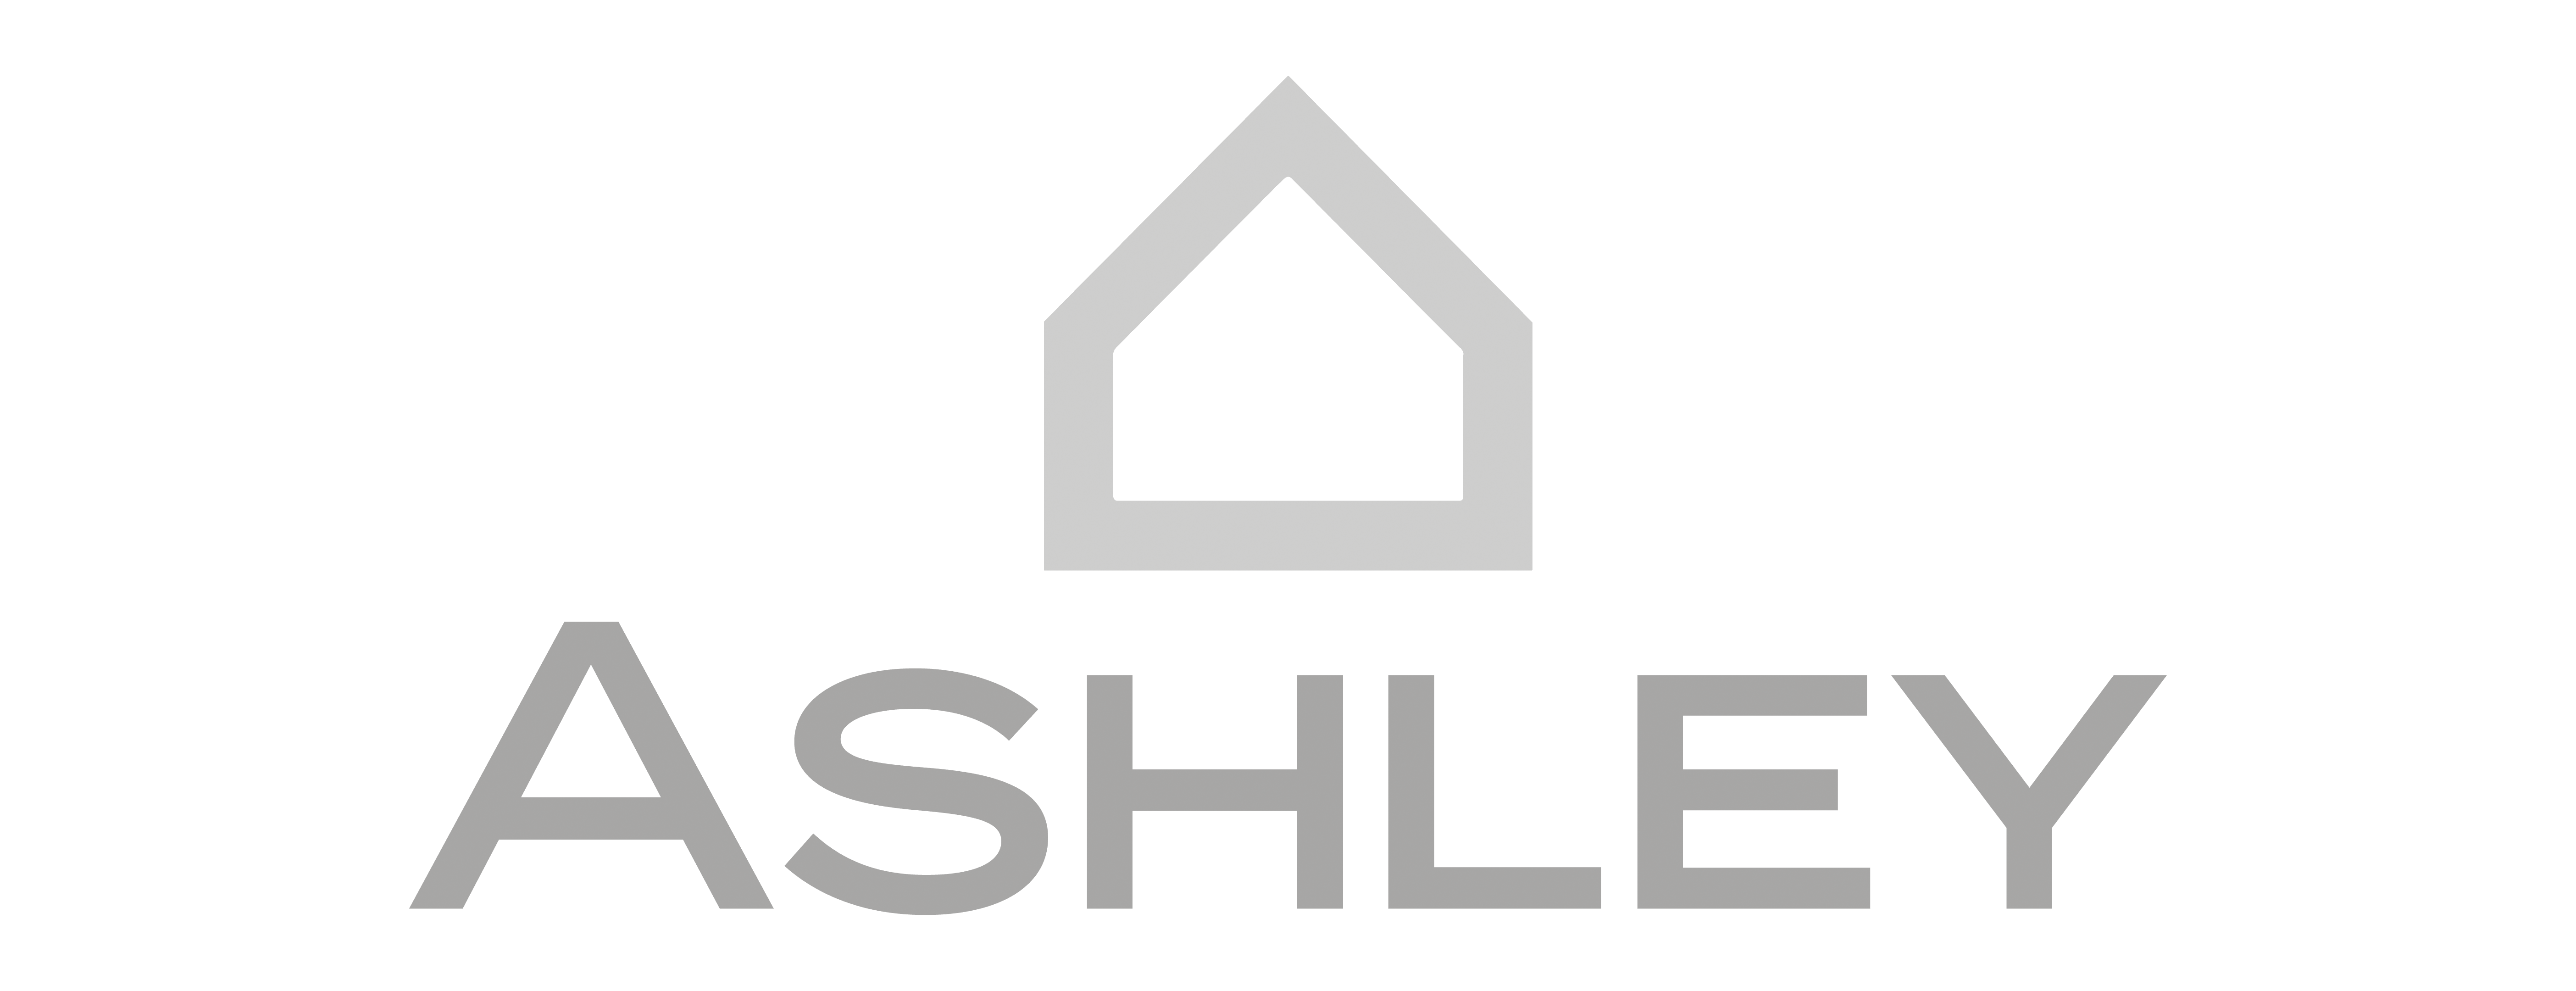 A corporate logo featuring a subtle integration of a triangle and a house element.